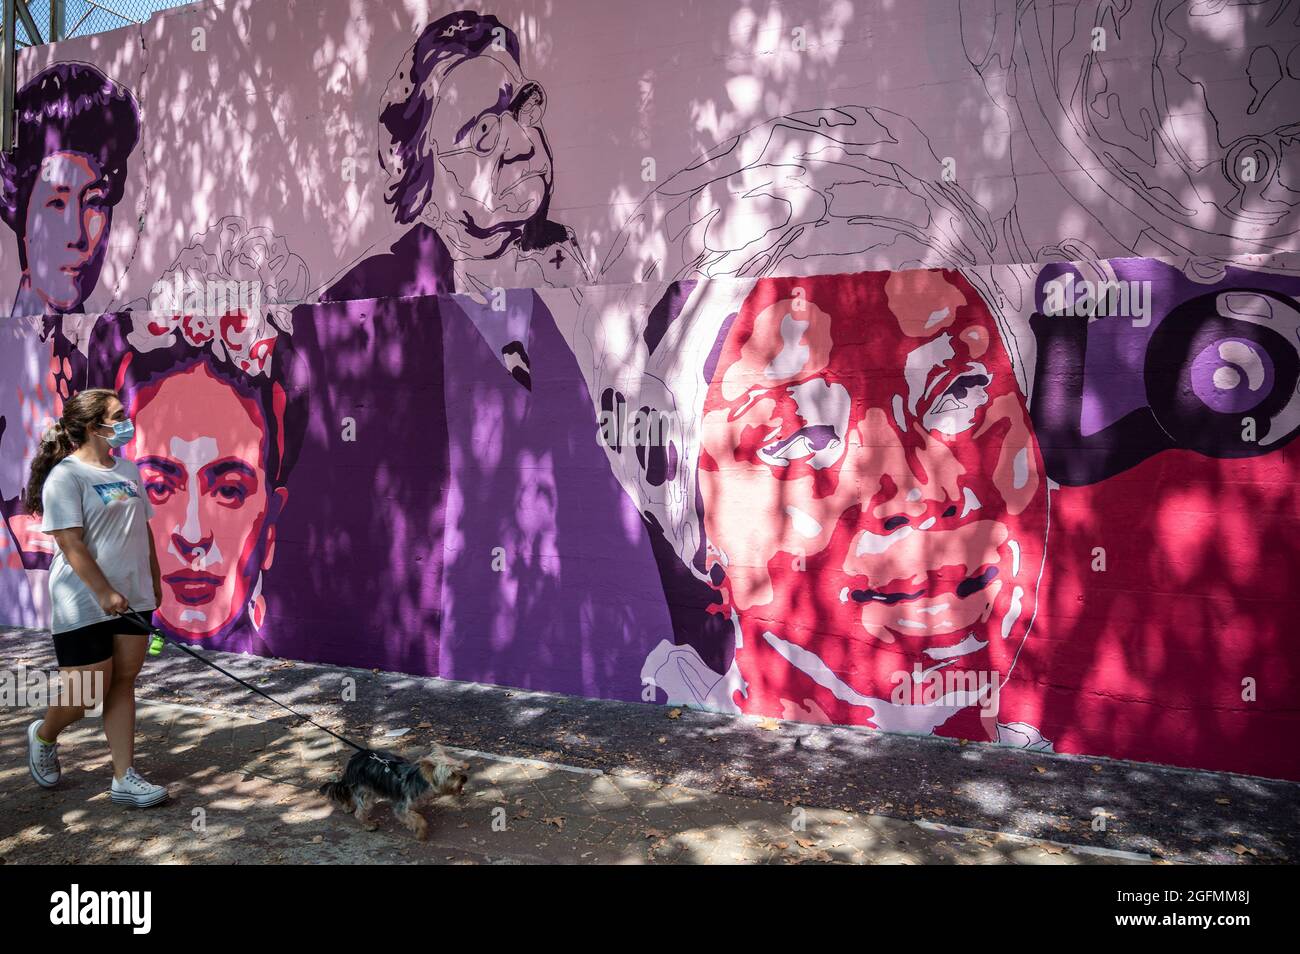 Madrid, Spain, 26/08/2021, A woman passing by a feminist mural that is being repainted by members of UNLOGIC artistic group. The mural appeared vandalized during the past International Women's Day and represents famous women from around the world, with the faces of 15 women who are part of history for their fight in favor of equality: Angela Davis, Frida Kahlo, Nina Simone, Rigoberta Menchu, Lucia Sanchez Saornil, Rosa Arauzo, Valentina Tereshkova, Chimamanda Ngozi, Emma Goldman, Kanno Sugato, Liudmila Pavlichenko, Billy Jean King, Gata Cattana, Rosa Parks, and Comandanta Ramona. Stock Photo